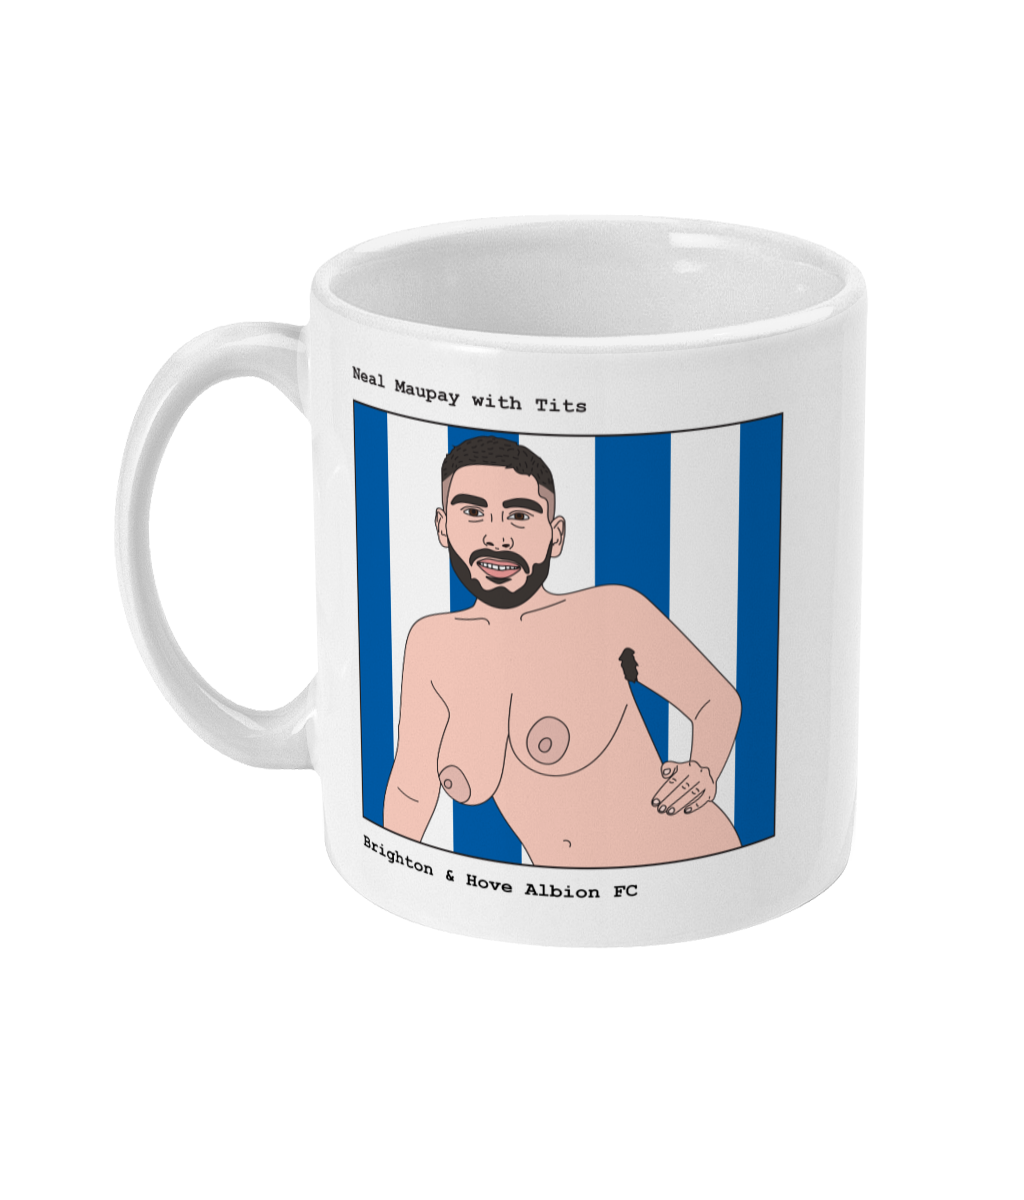 Neal Maupay with Tits